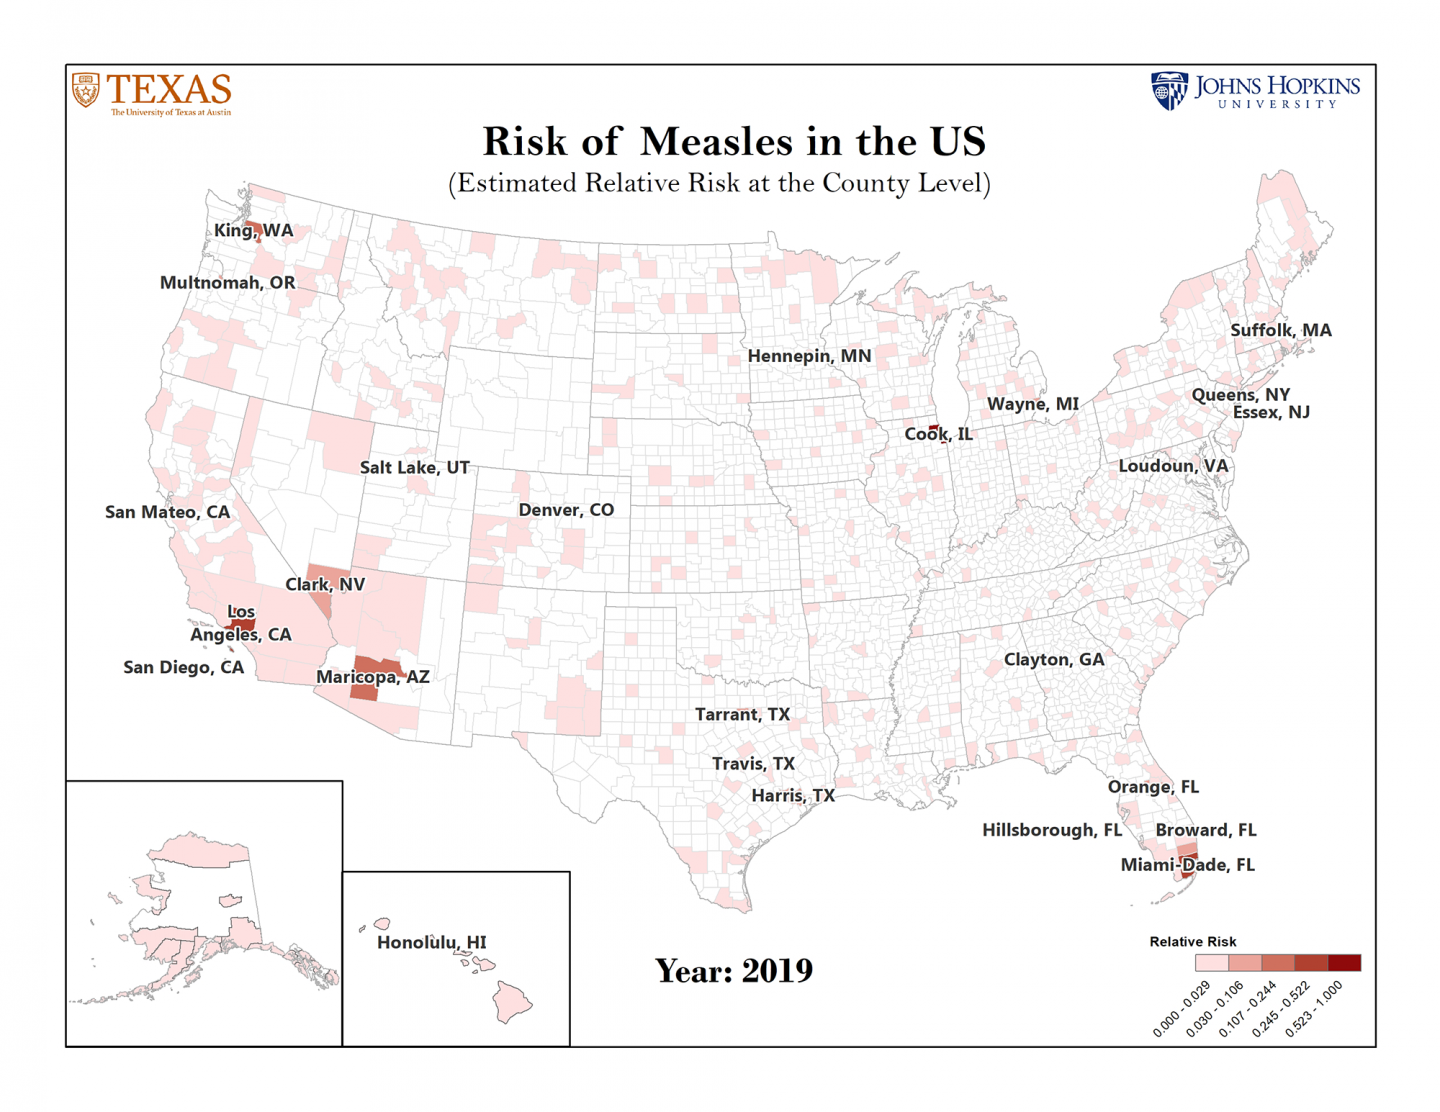 Map of U.S. counties shaded according to their level of risk